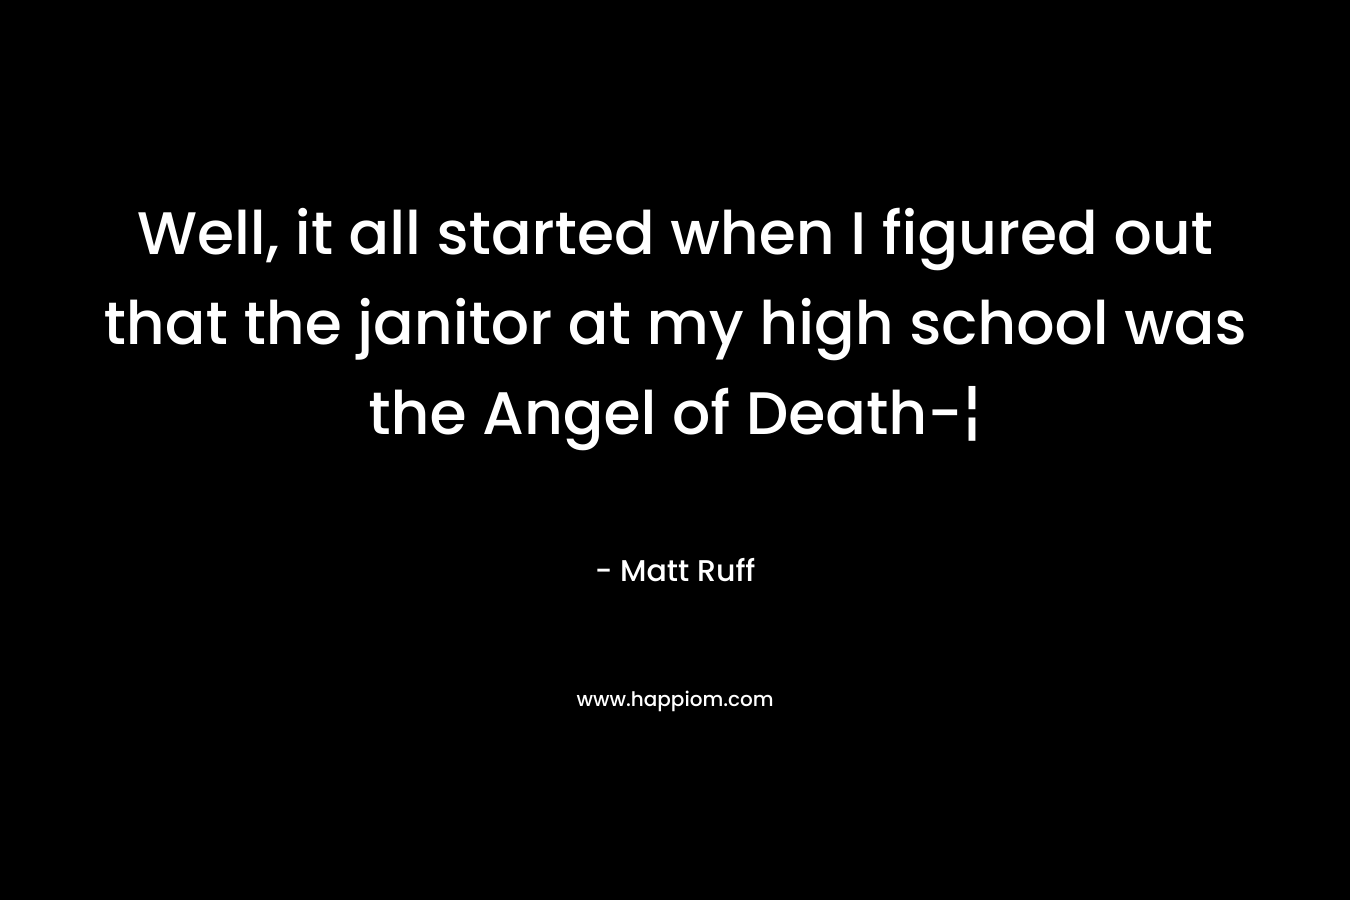 Well, it all started when I figured out that the janitor at my high school was the Angel of Death-¦ – Matt Ruff